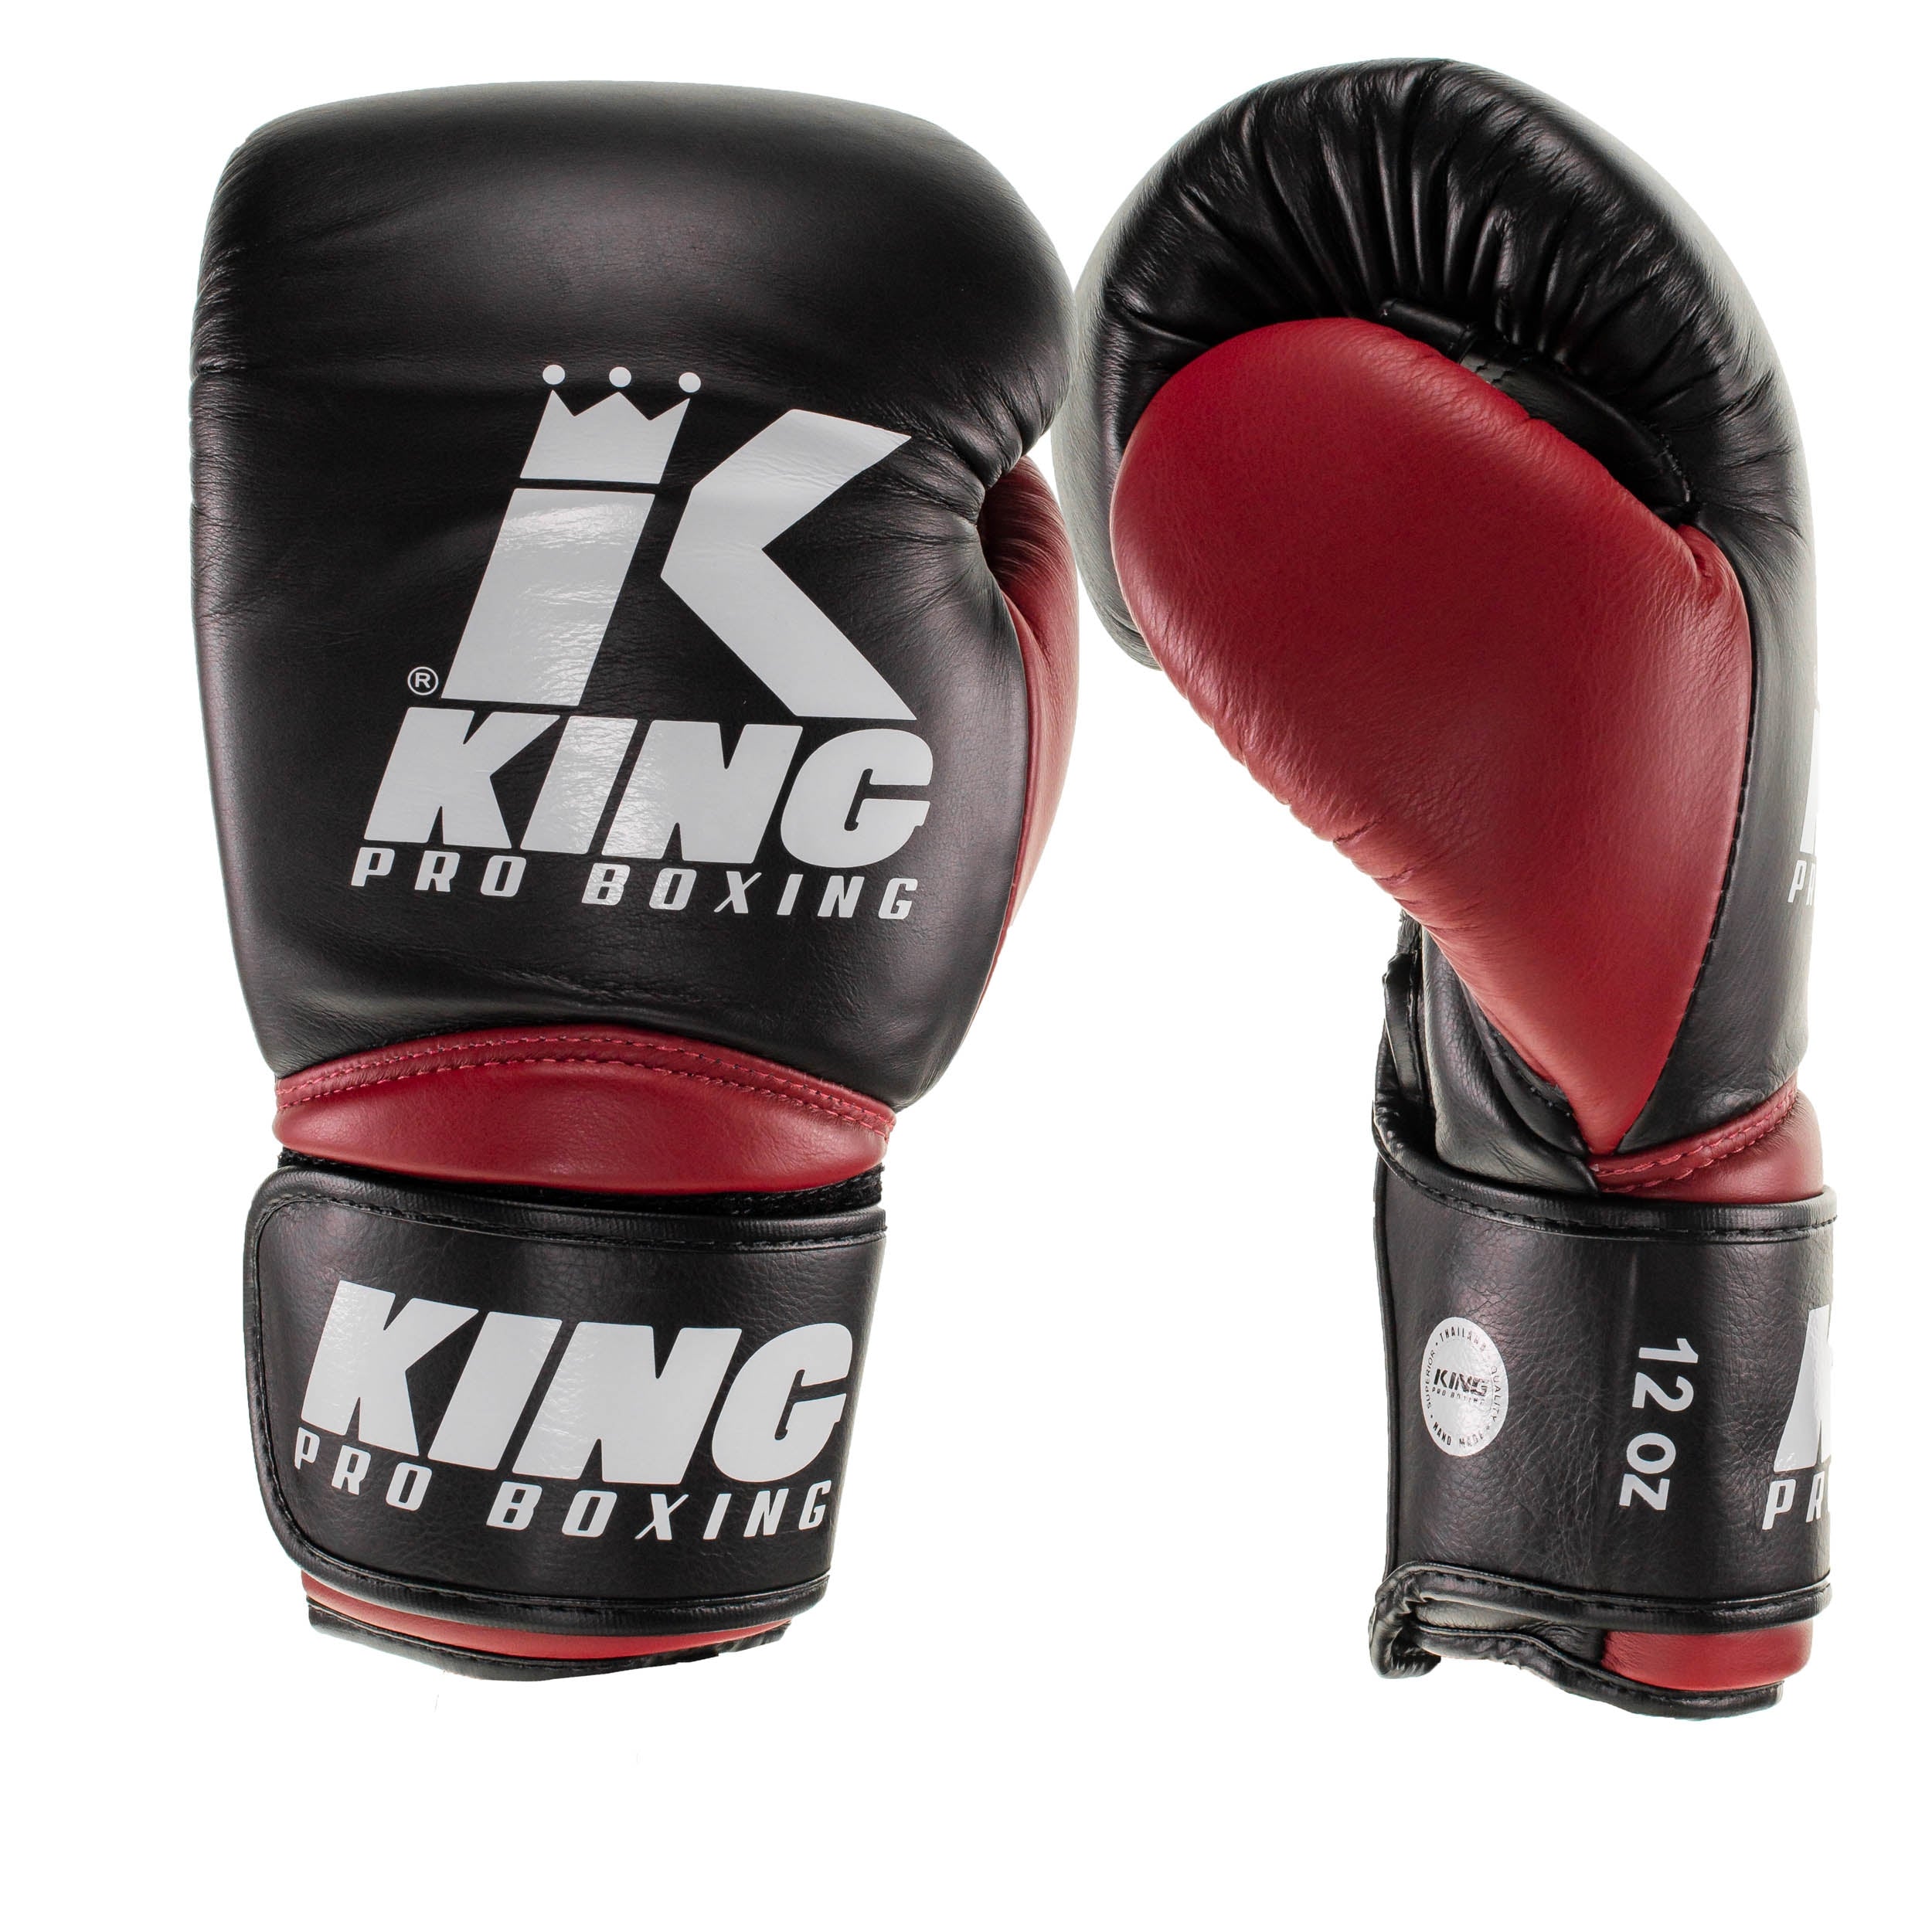 King PRO boxing boxing gloves - STAR 10